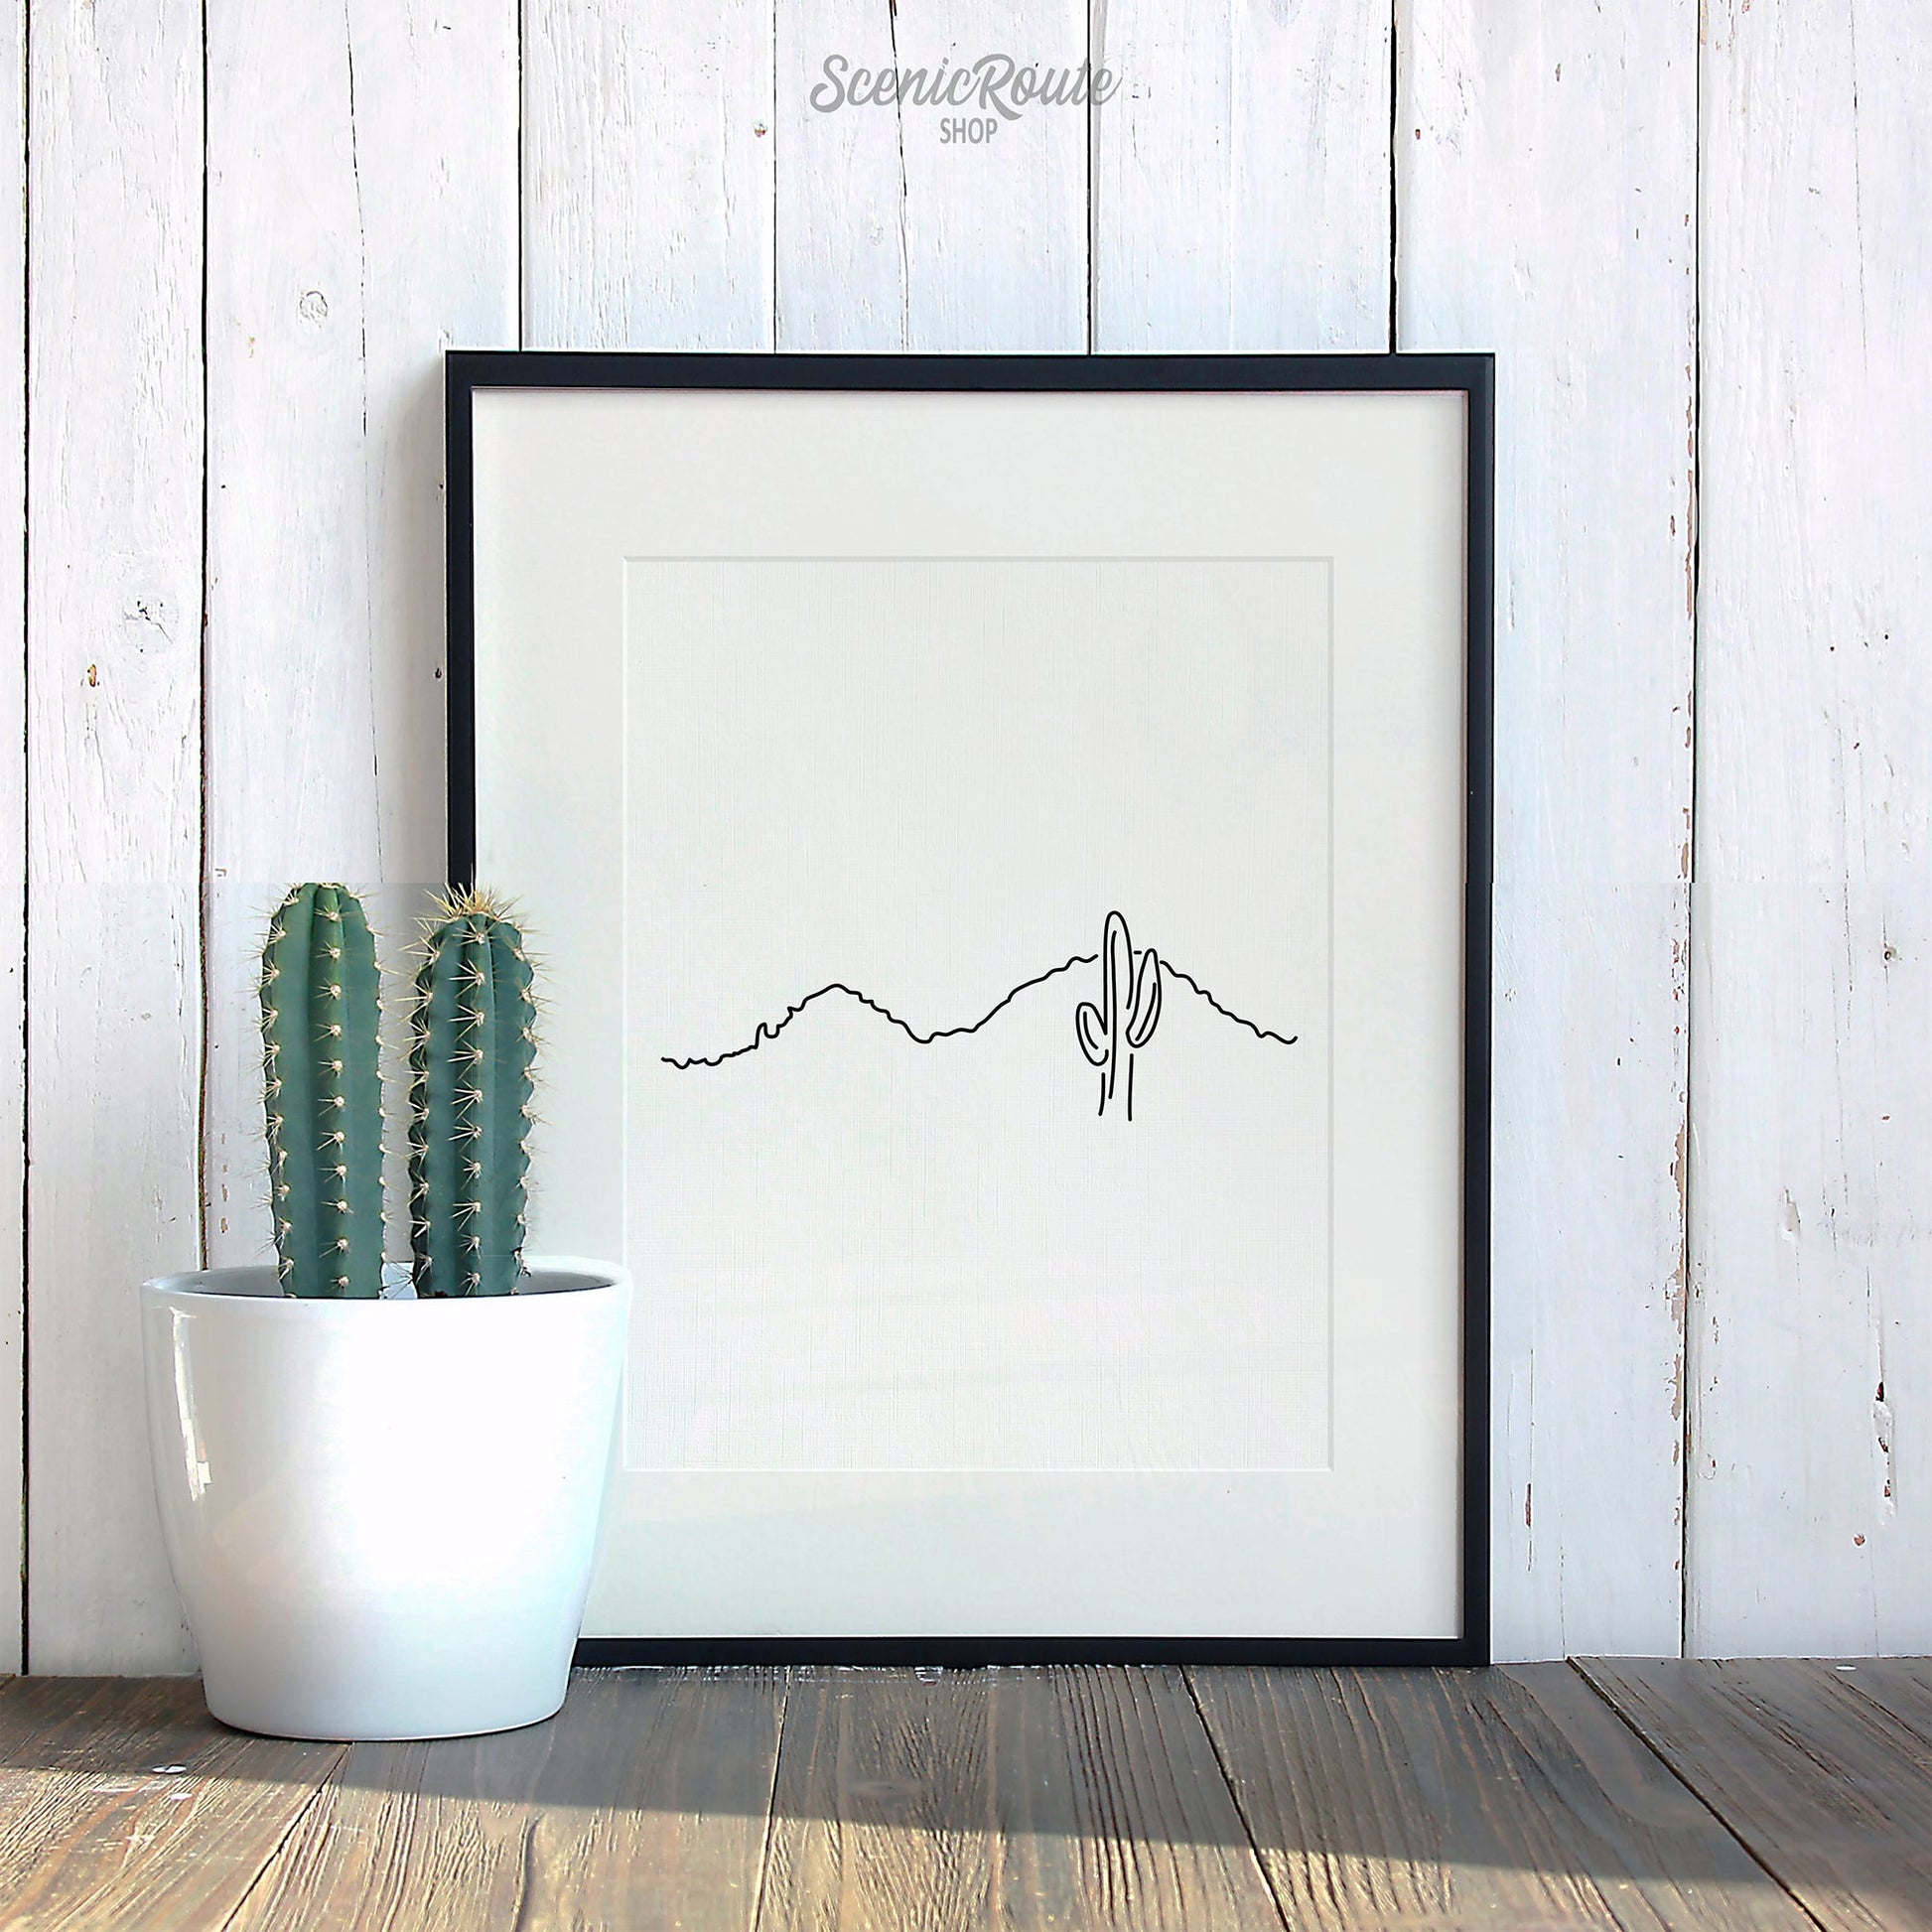 A framed line art drawing of Camelback Mountain leaning against a wood wall with a cactus